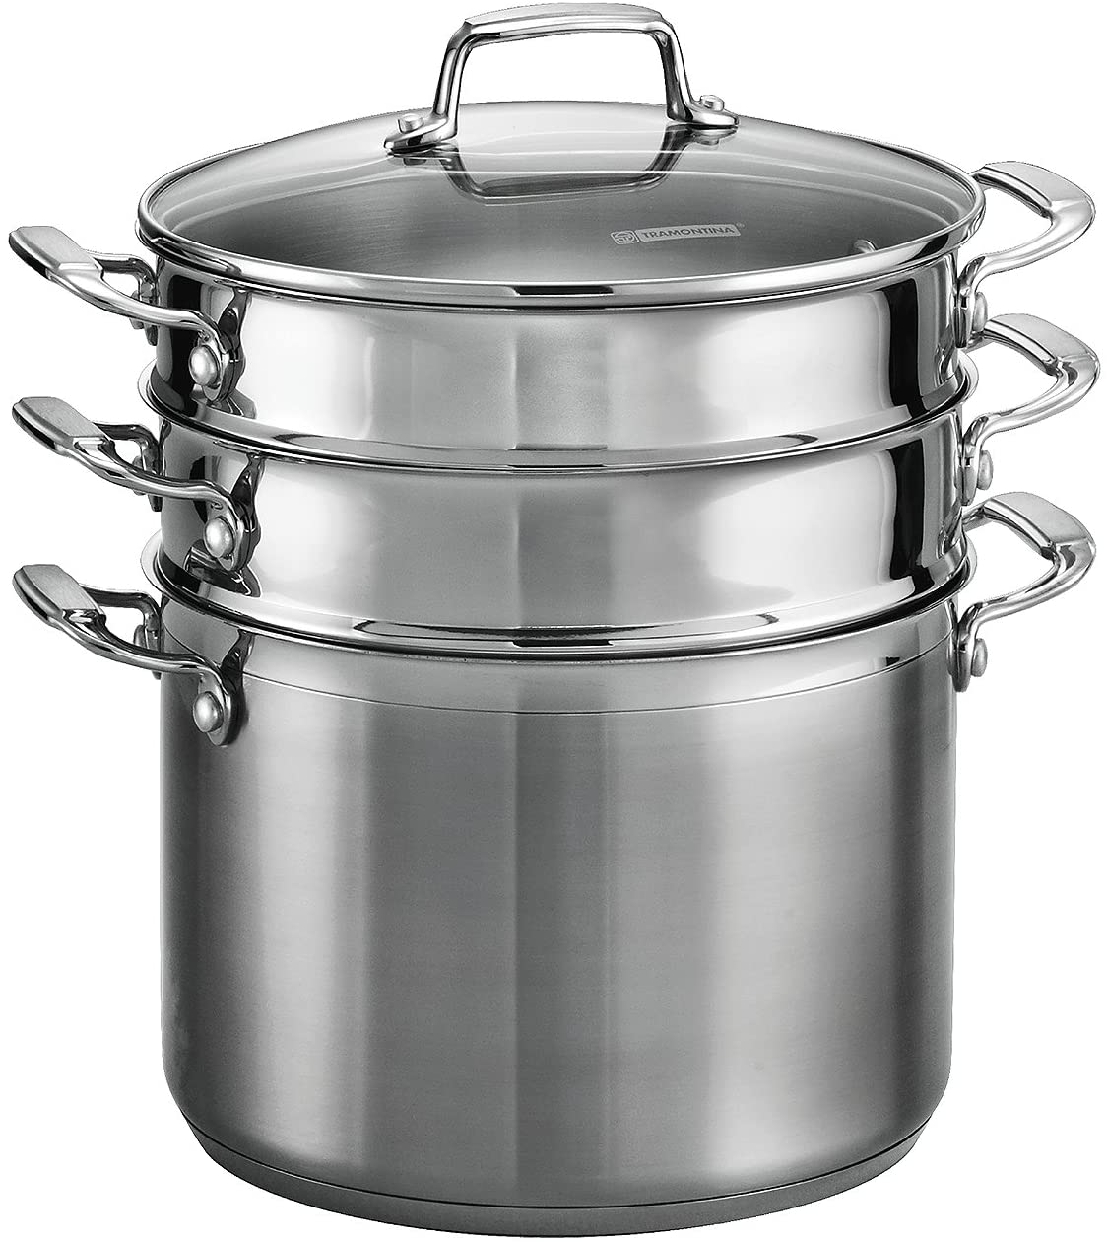 Tramontina(トラモンティア) Gourmet Tri-ply Base Stainless Steel 4-Piece 8-Quart Multi-Cooker シルバーの商品画像2 